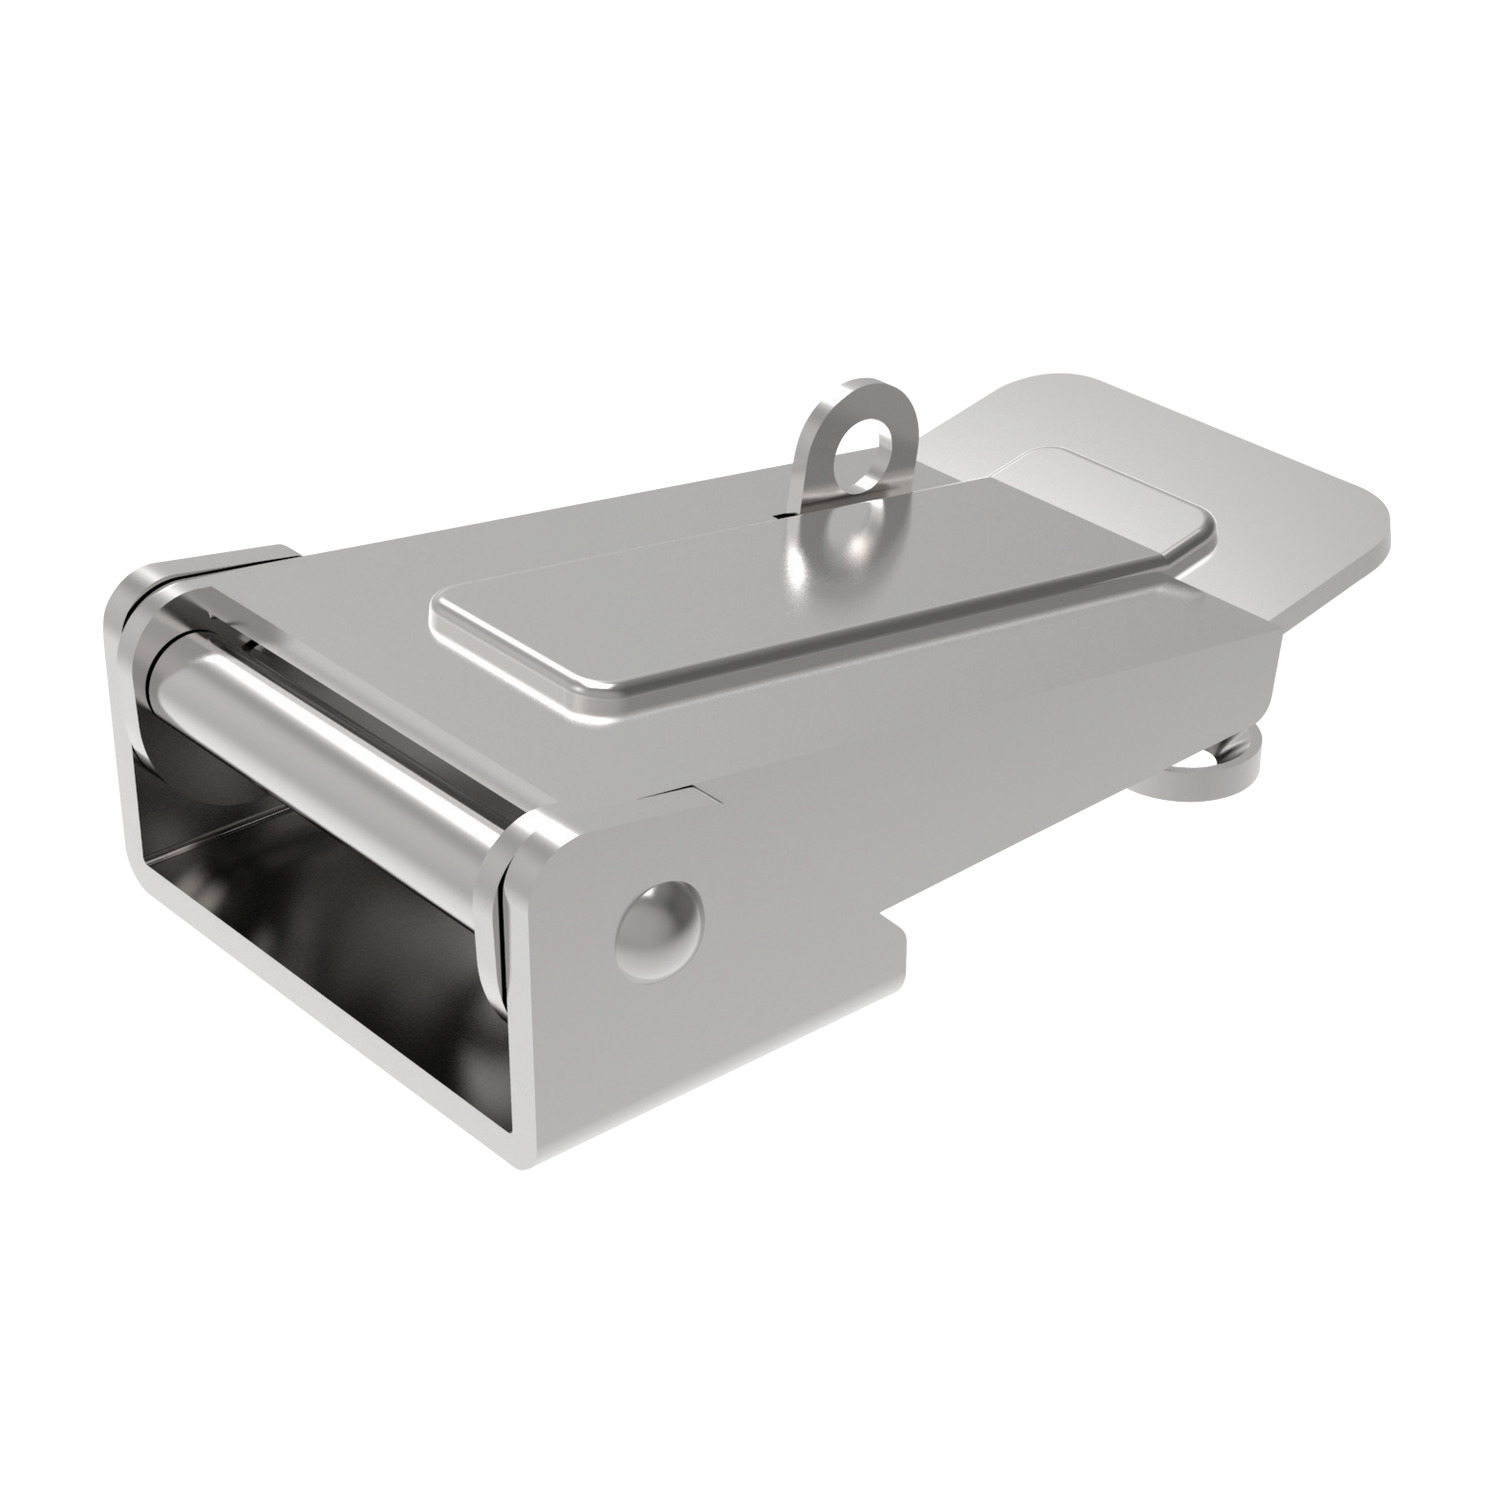 J0562.AC0004 Toggle Latches - Zinc plated steel. Zinc Plated Steel - 88 - 26 - 48,5